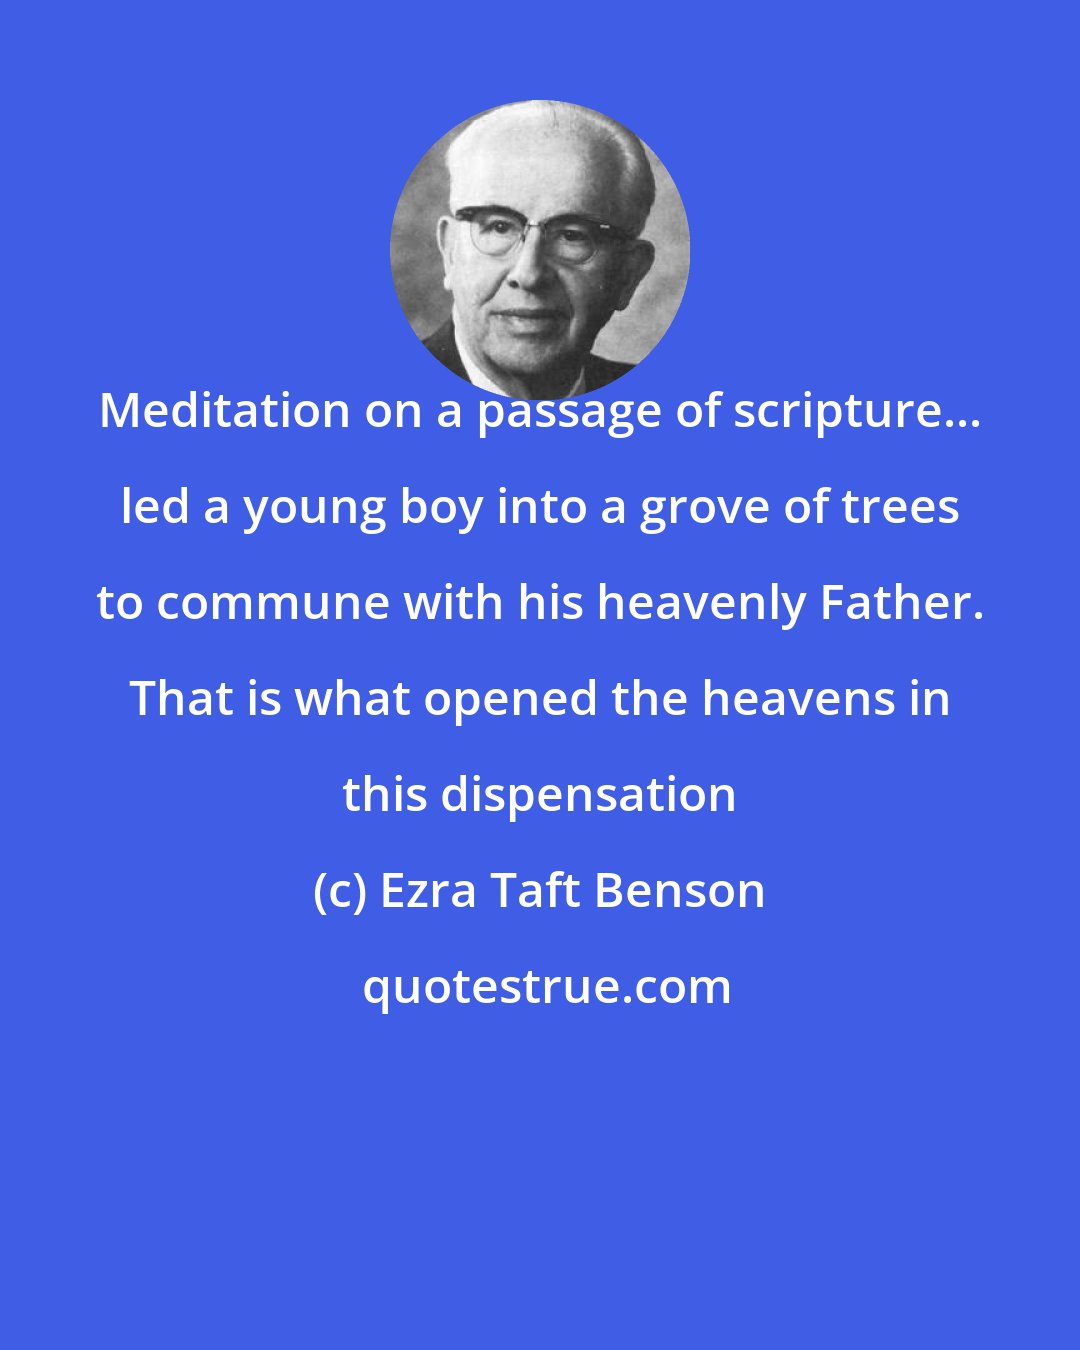 Ezra Taft Benson: Meditation on a passage of scripture... led a young boy into a grove of trees to commune with his heavenly Father. That is what opened the heavens in this dispensation